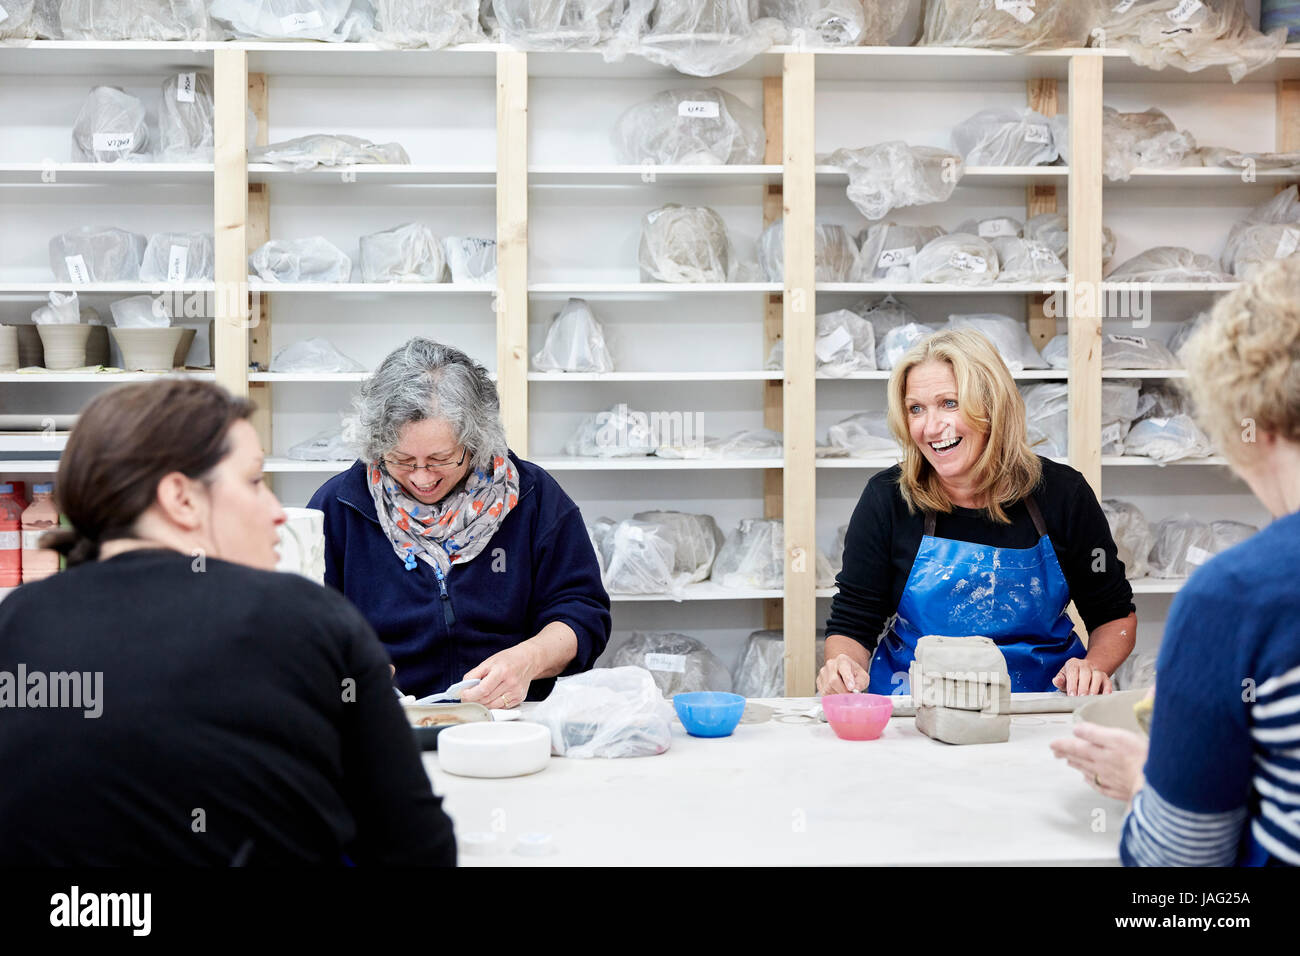 A group of four women chatting together and working on their pots in a pottery studio. Stock Photo